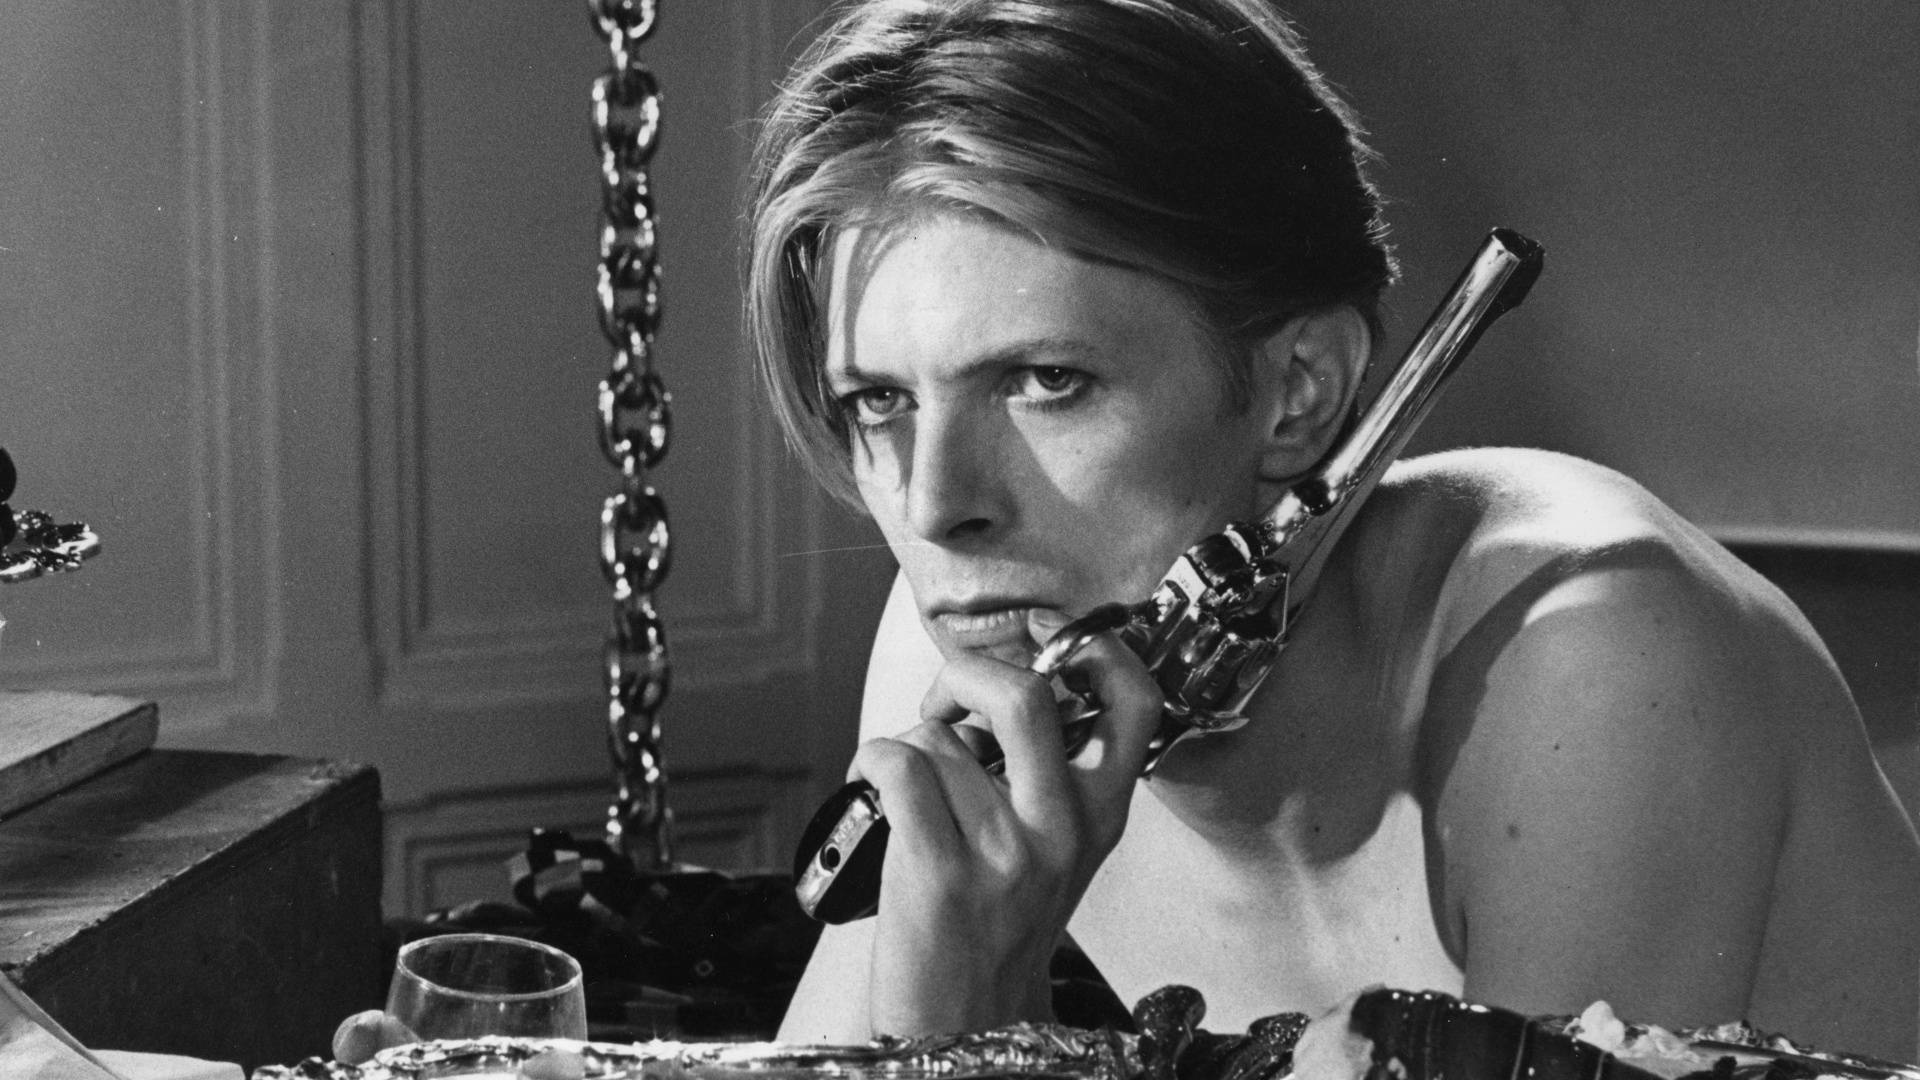 David Bowie With Pistol Background